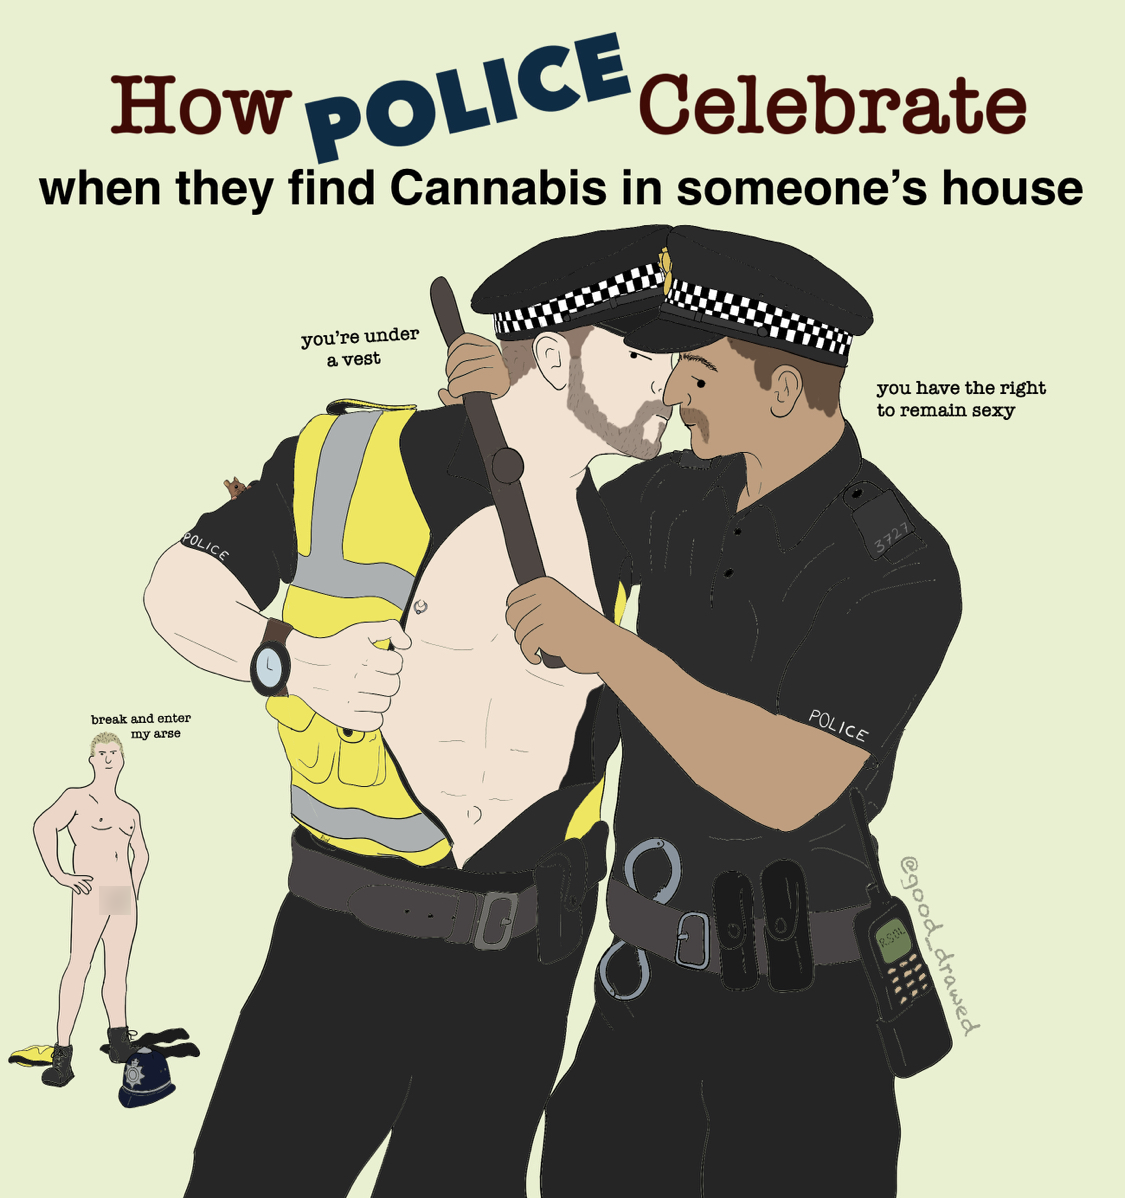 cartoon - How Police Celebrate when they find Cannabis in someone's house you're under & vest you have the right to remain sexy good